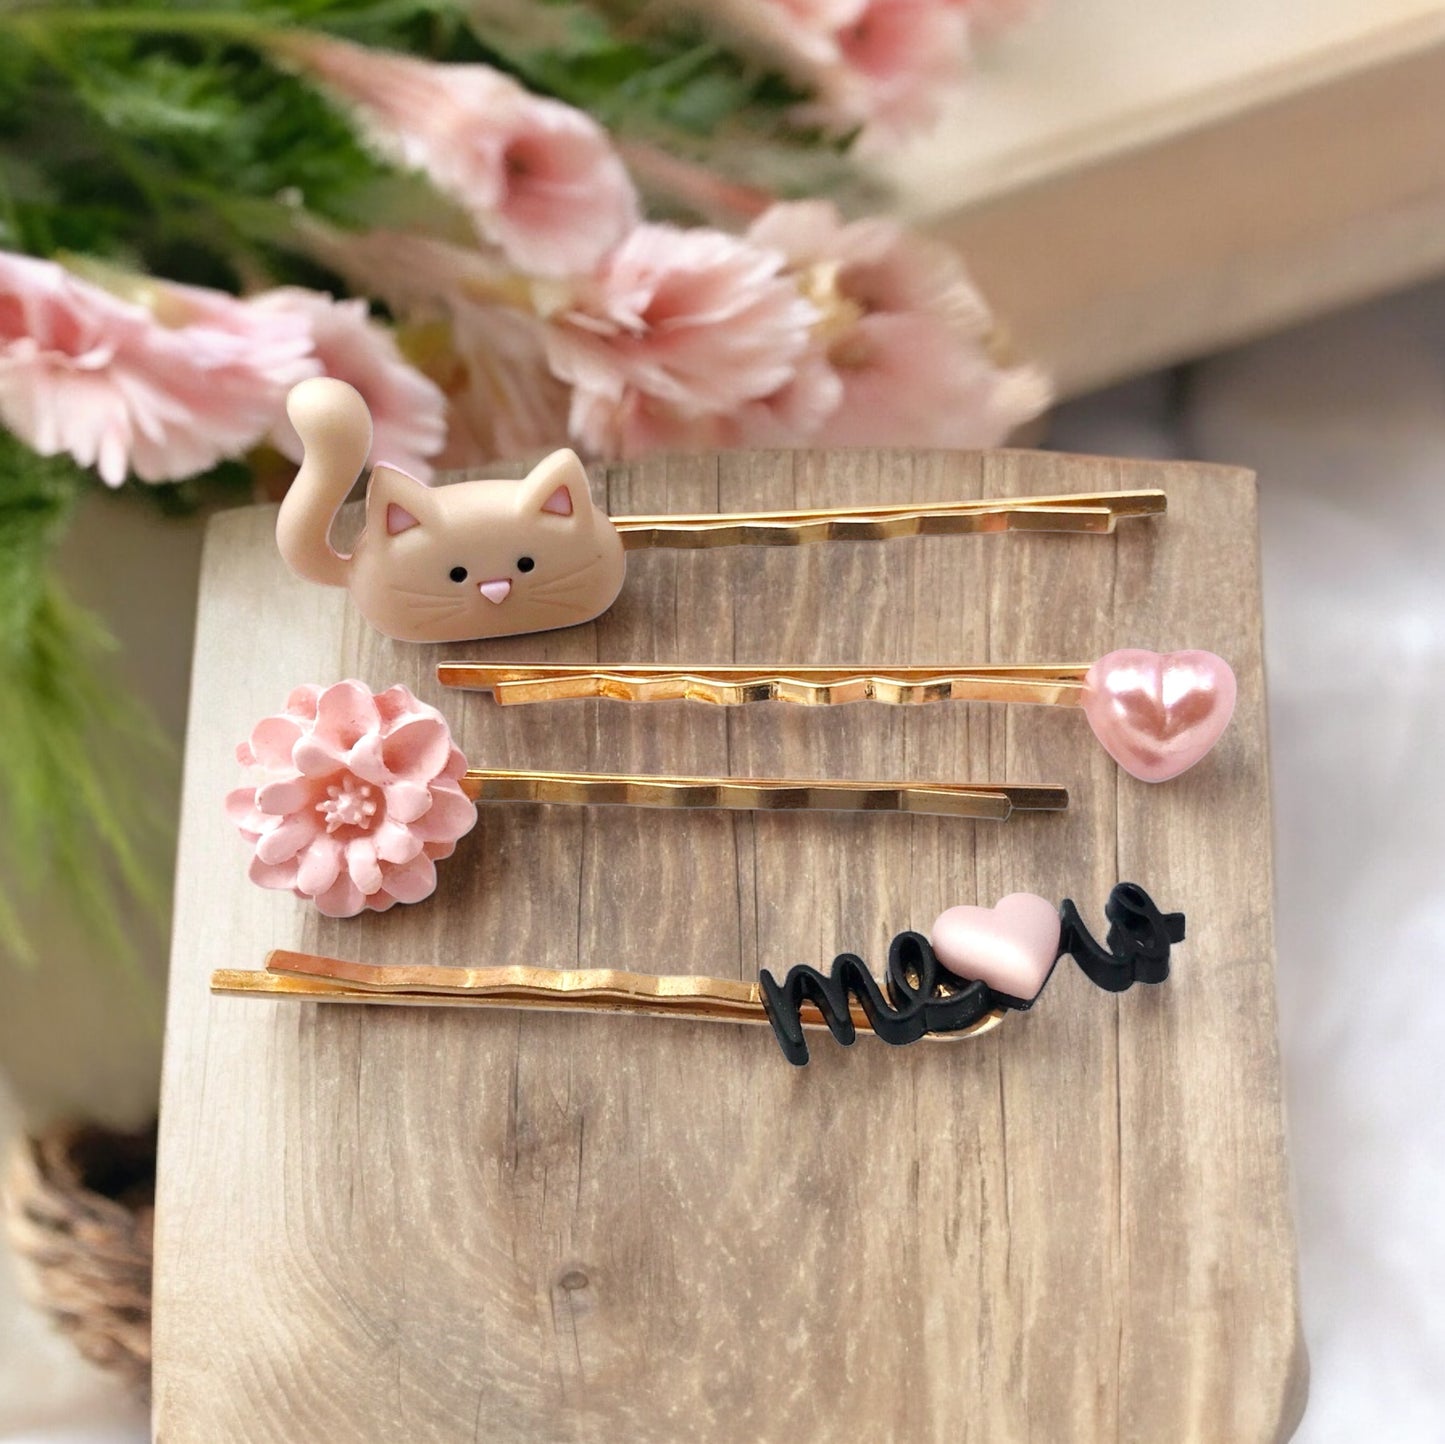 Set of Tan Cat, Pink Heart, Pink Flower, & Meow Hair Pins: Adorable Accessories for Cute Hairstyles"